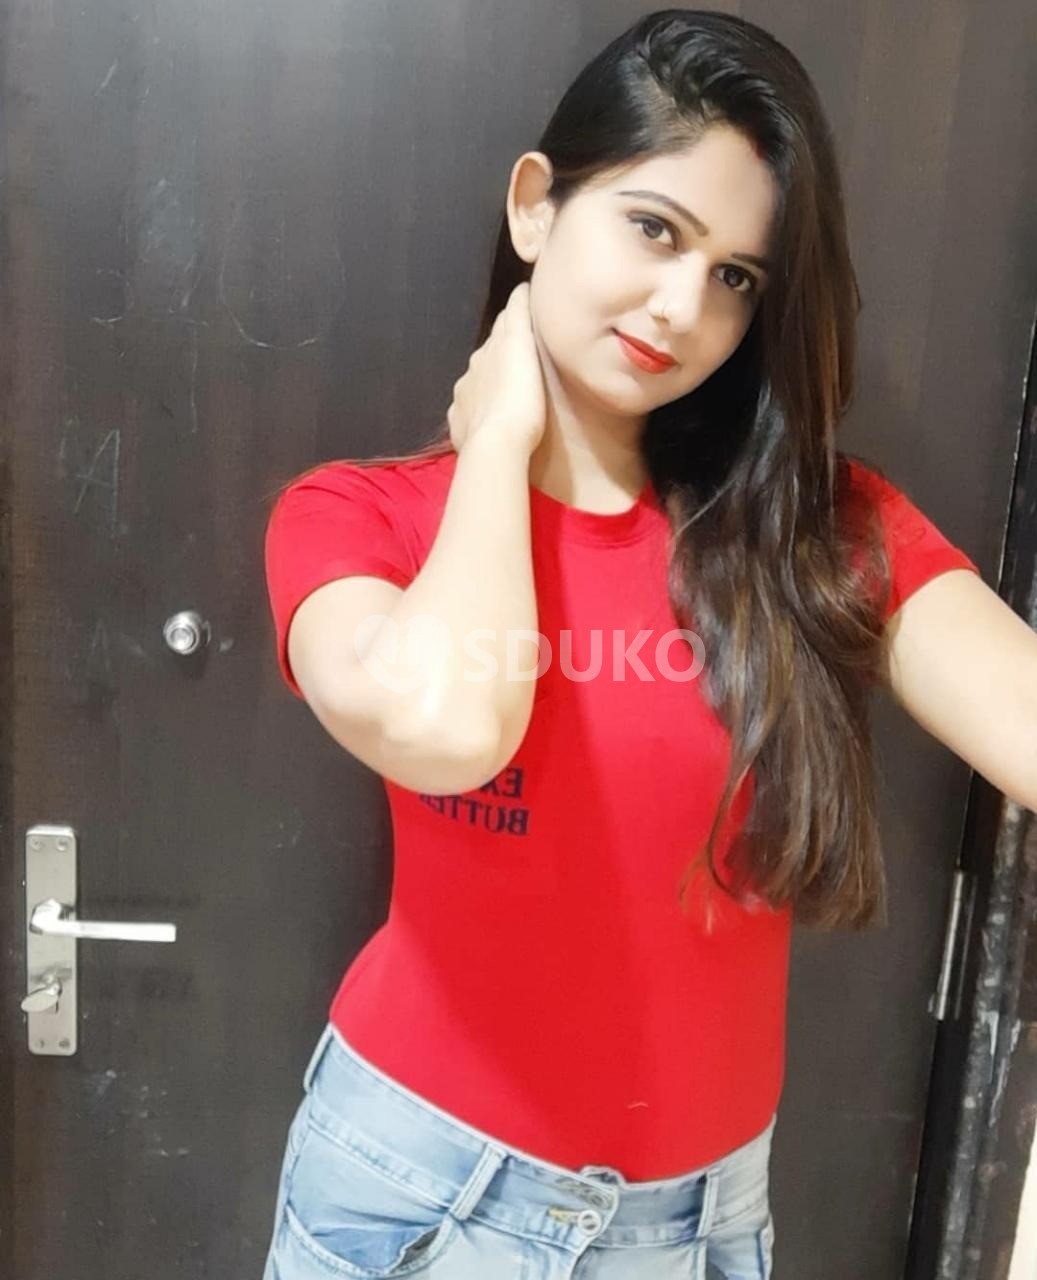 Amritsar TODAY LOW RATE (Kavya) ESCORT FULL HARD FUCK WITH NAUGHTY IF YOU WANT TO FUCK MY PUSSY WITH BIG BOOBS GIRLS- CA